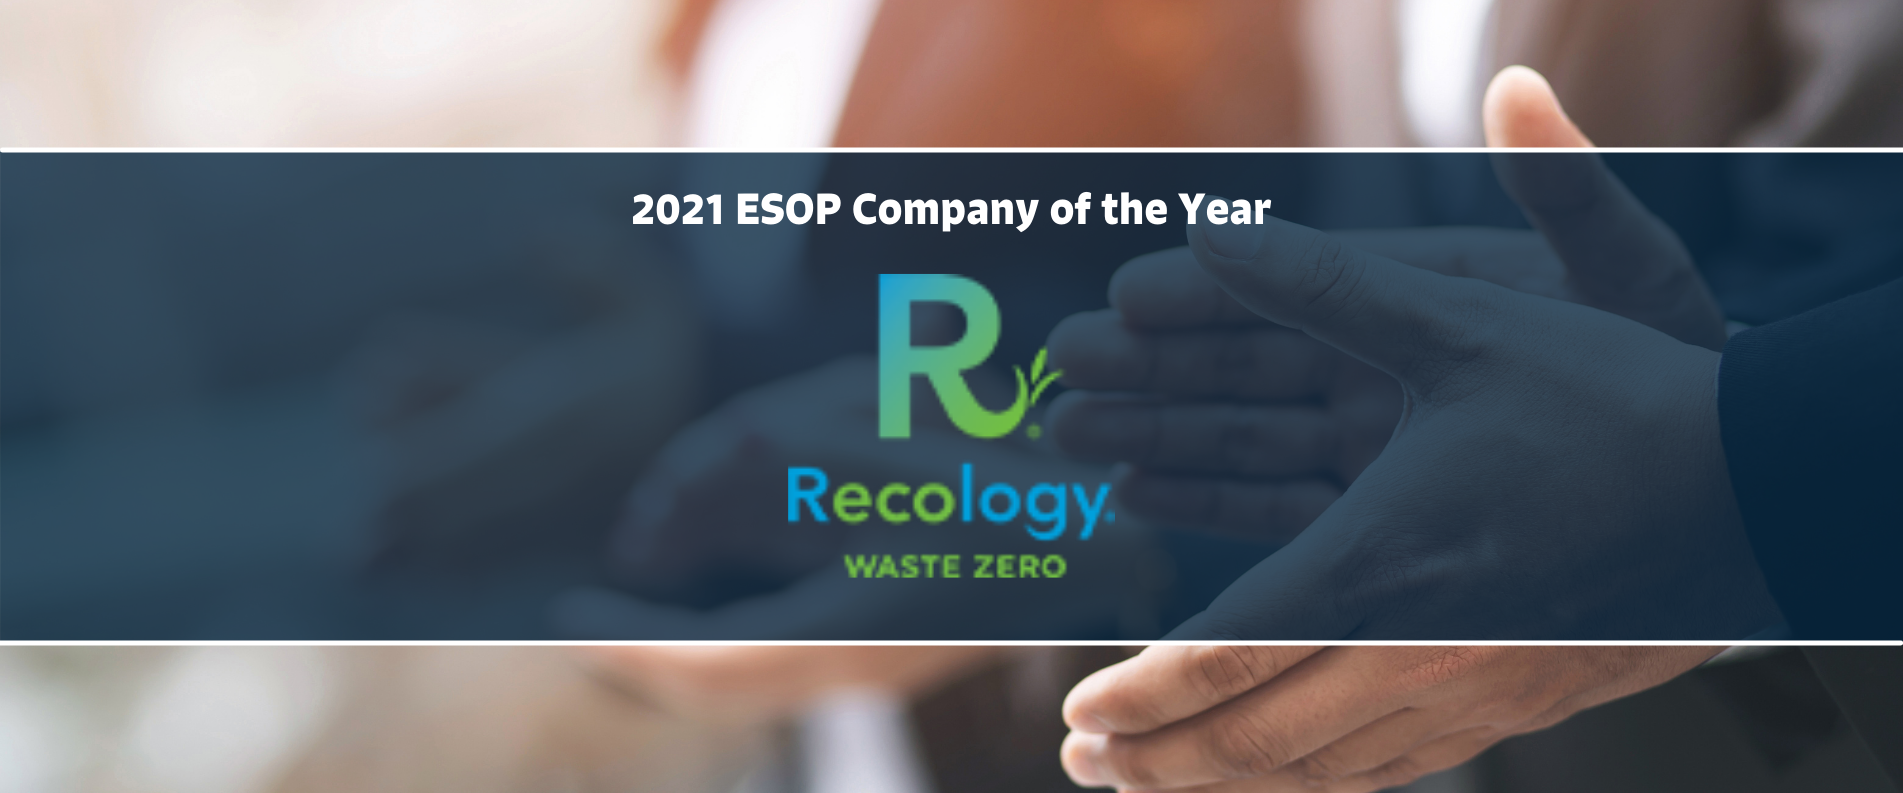 ESOP Company of the Year